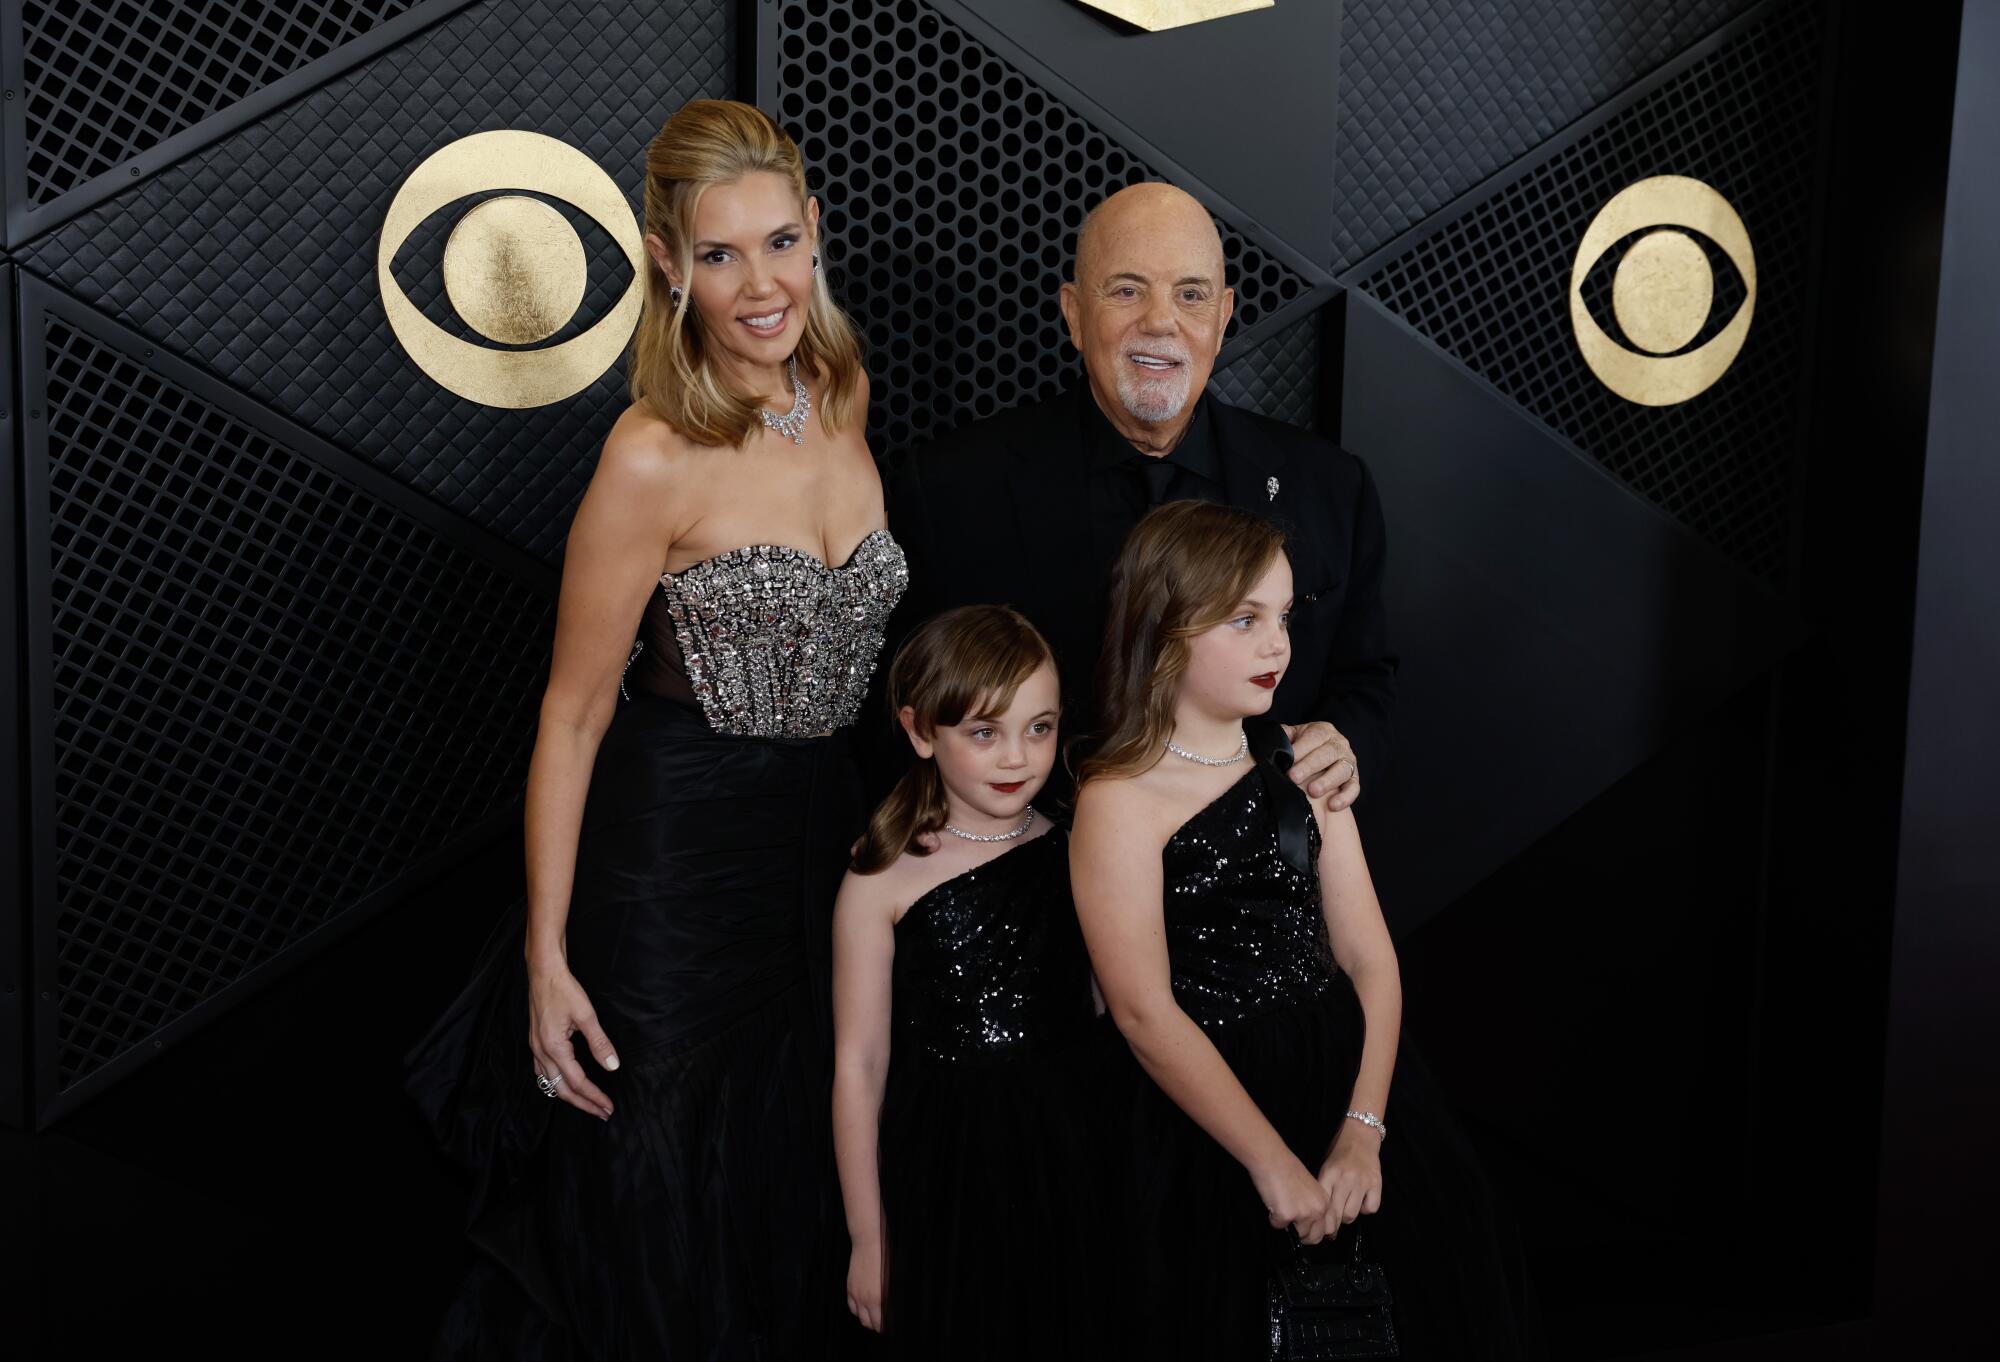 Billy Joel with his wife and their two young daughters, all wearing black 